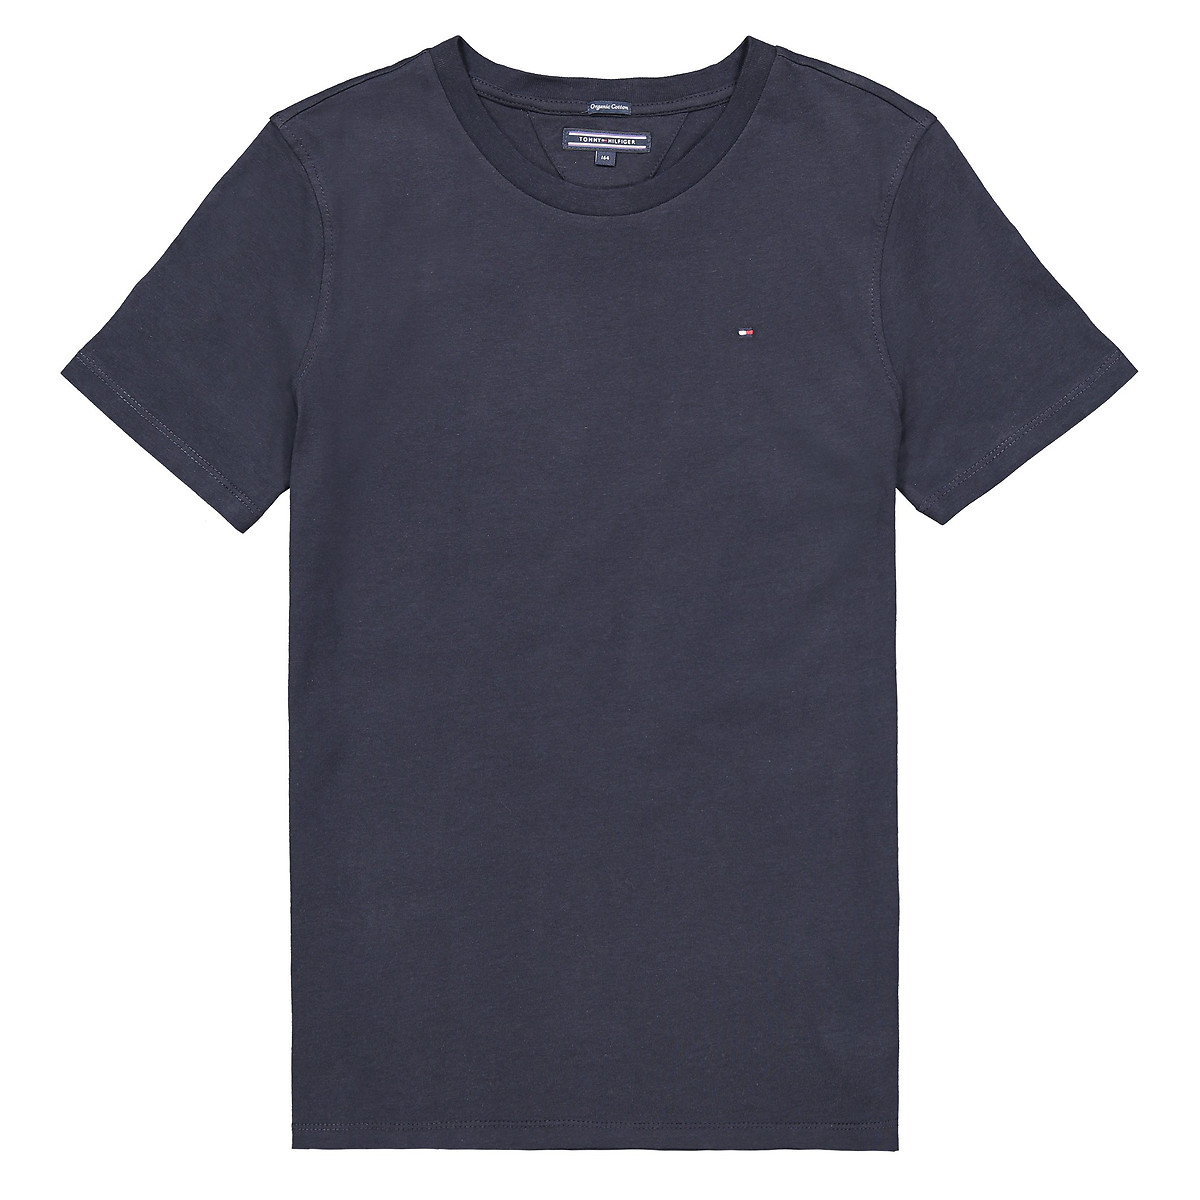 Image of Organic Cotton T-Shirt with Crew Neck, 12-16 Years